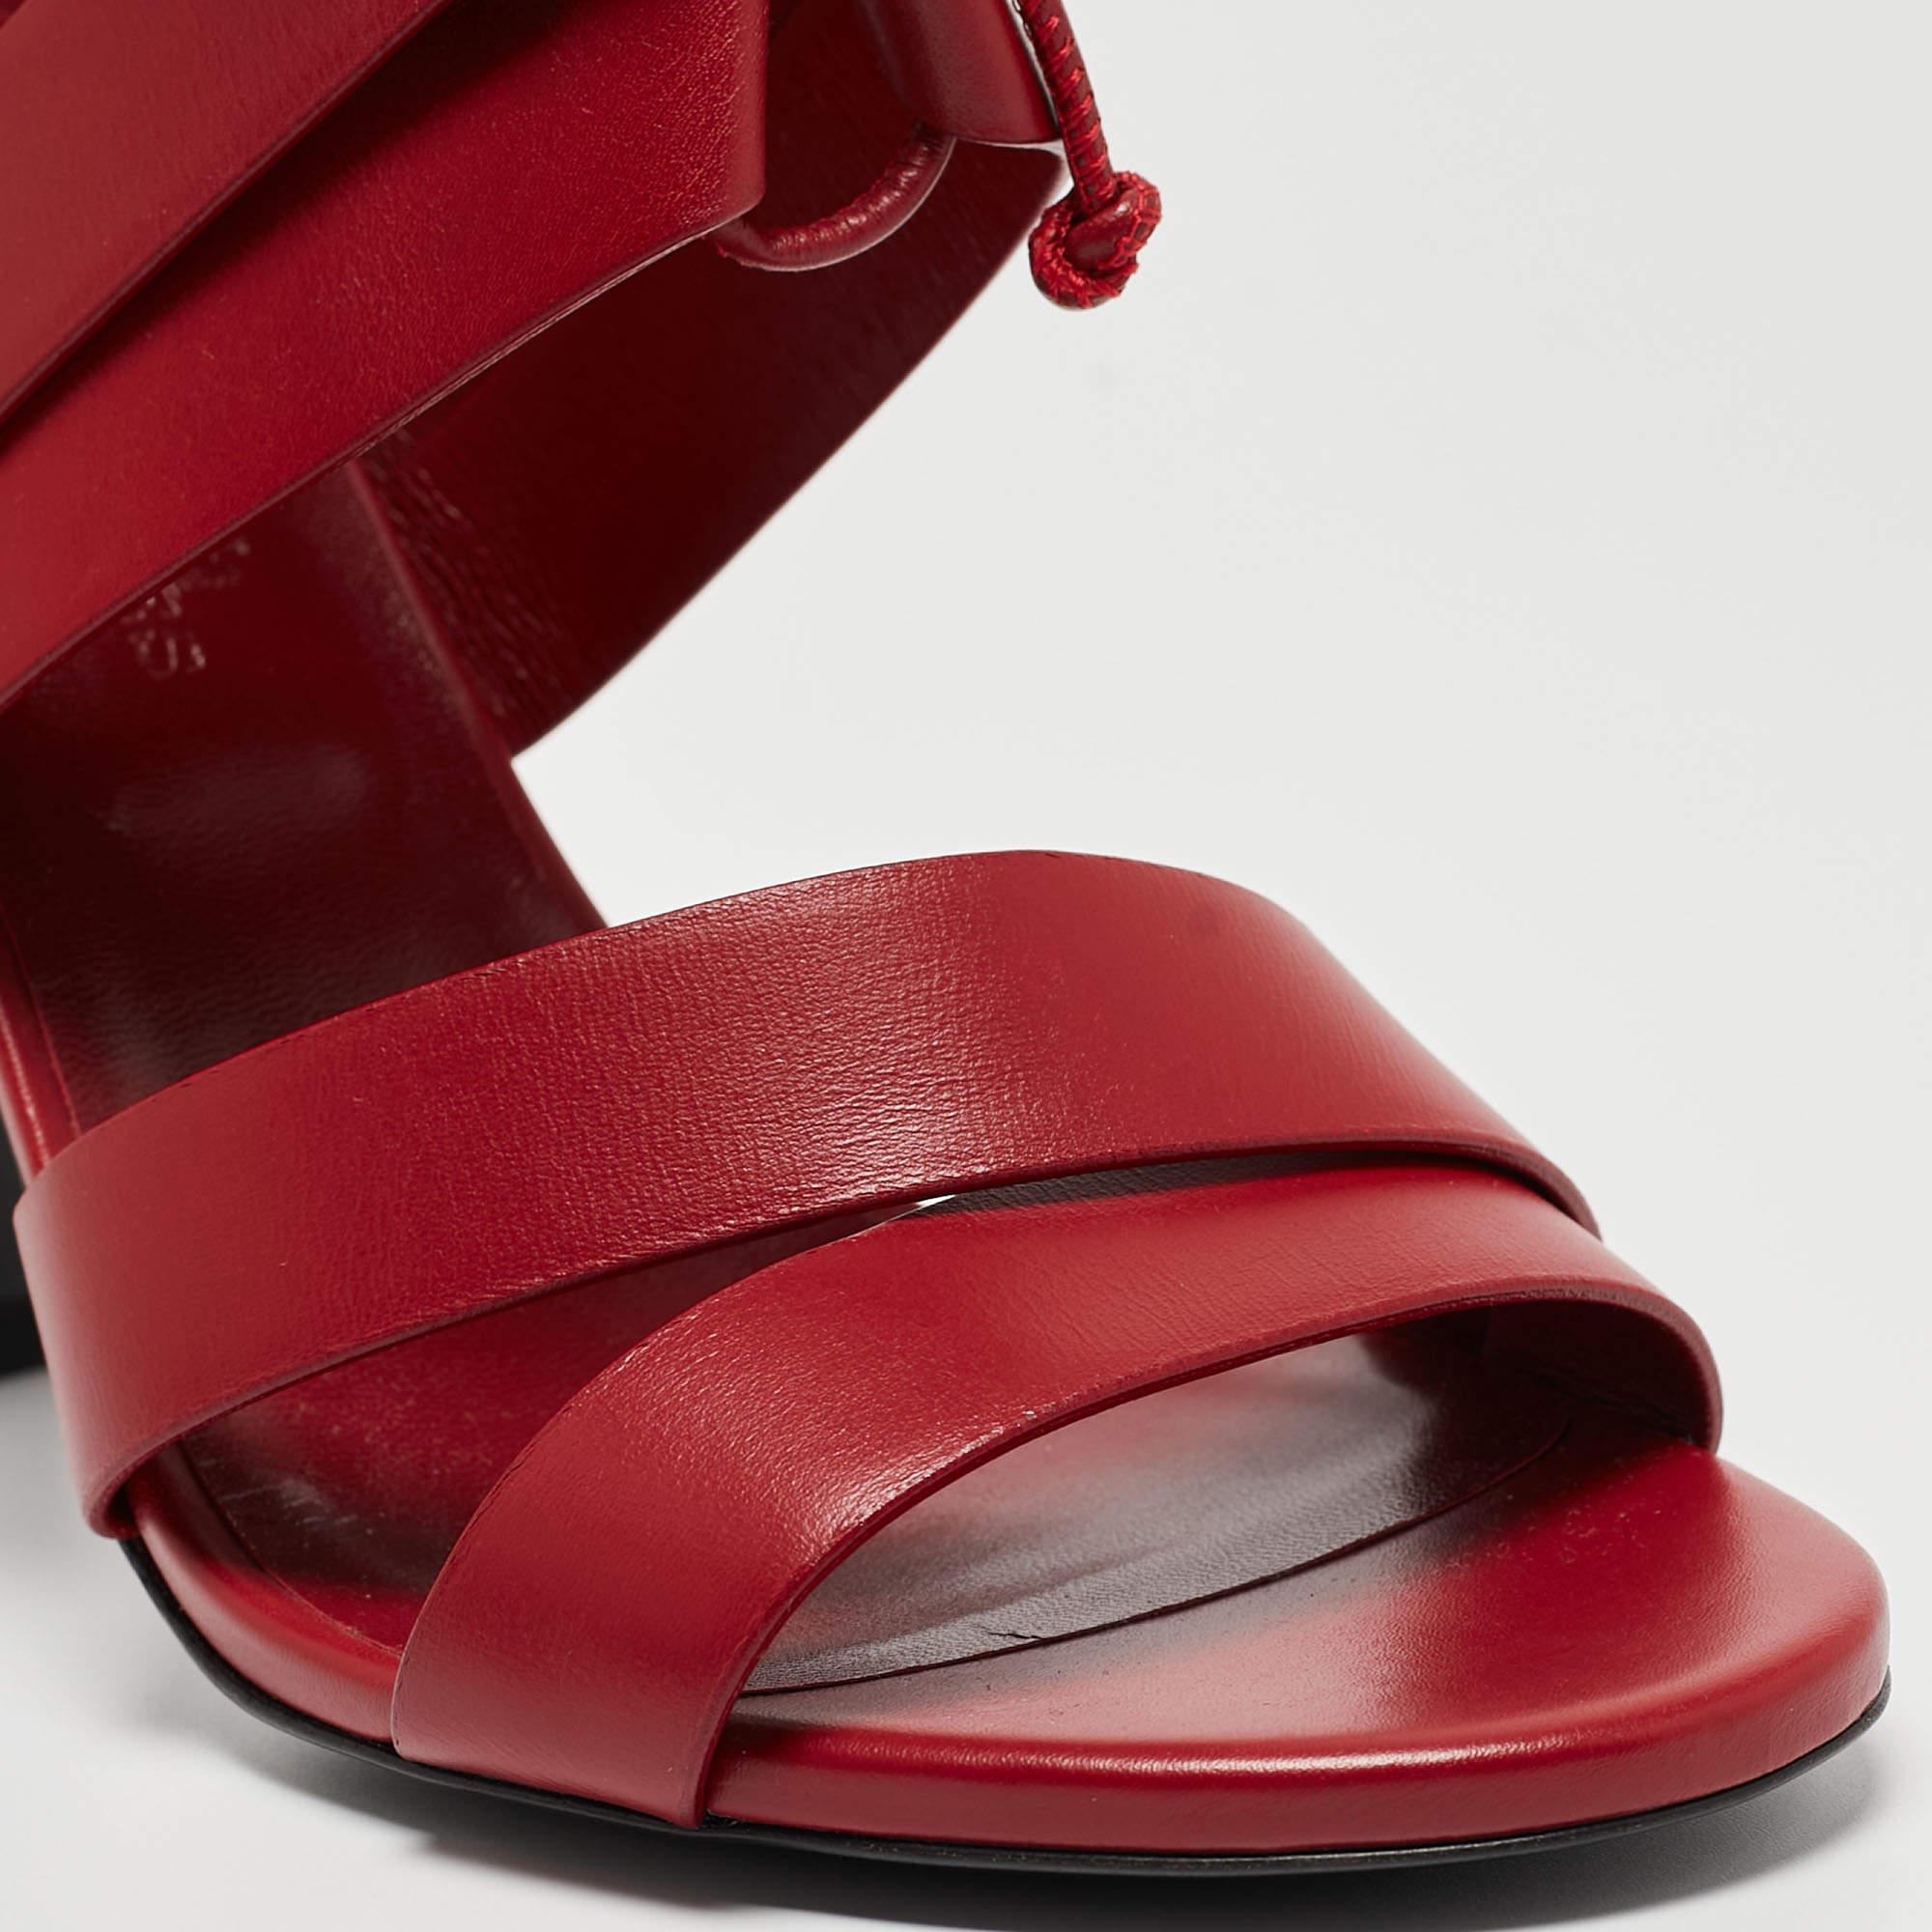 Hermes Dark Red Leather Ankle Strap Sandals Size 38 2